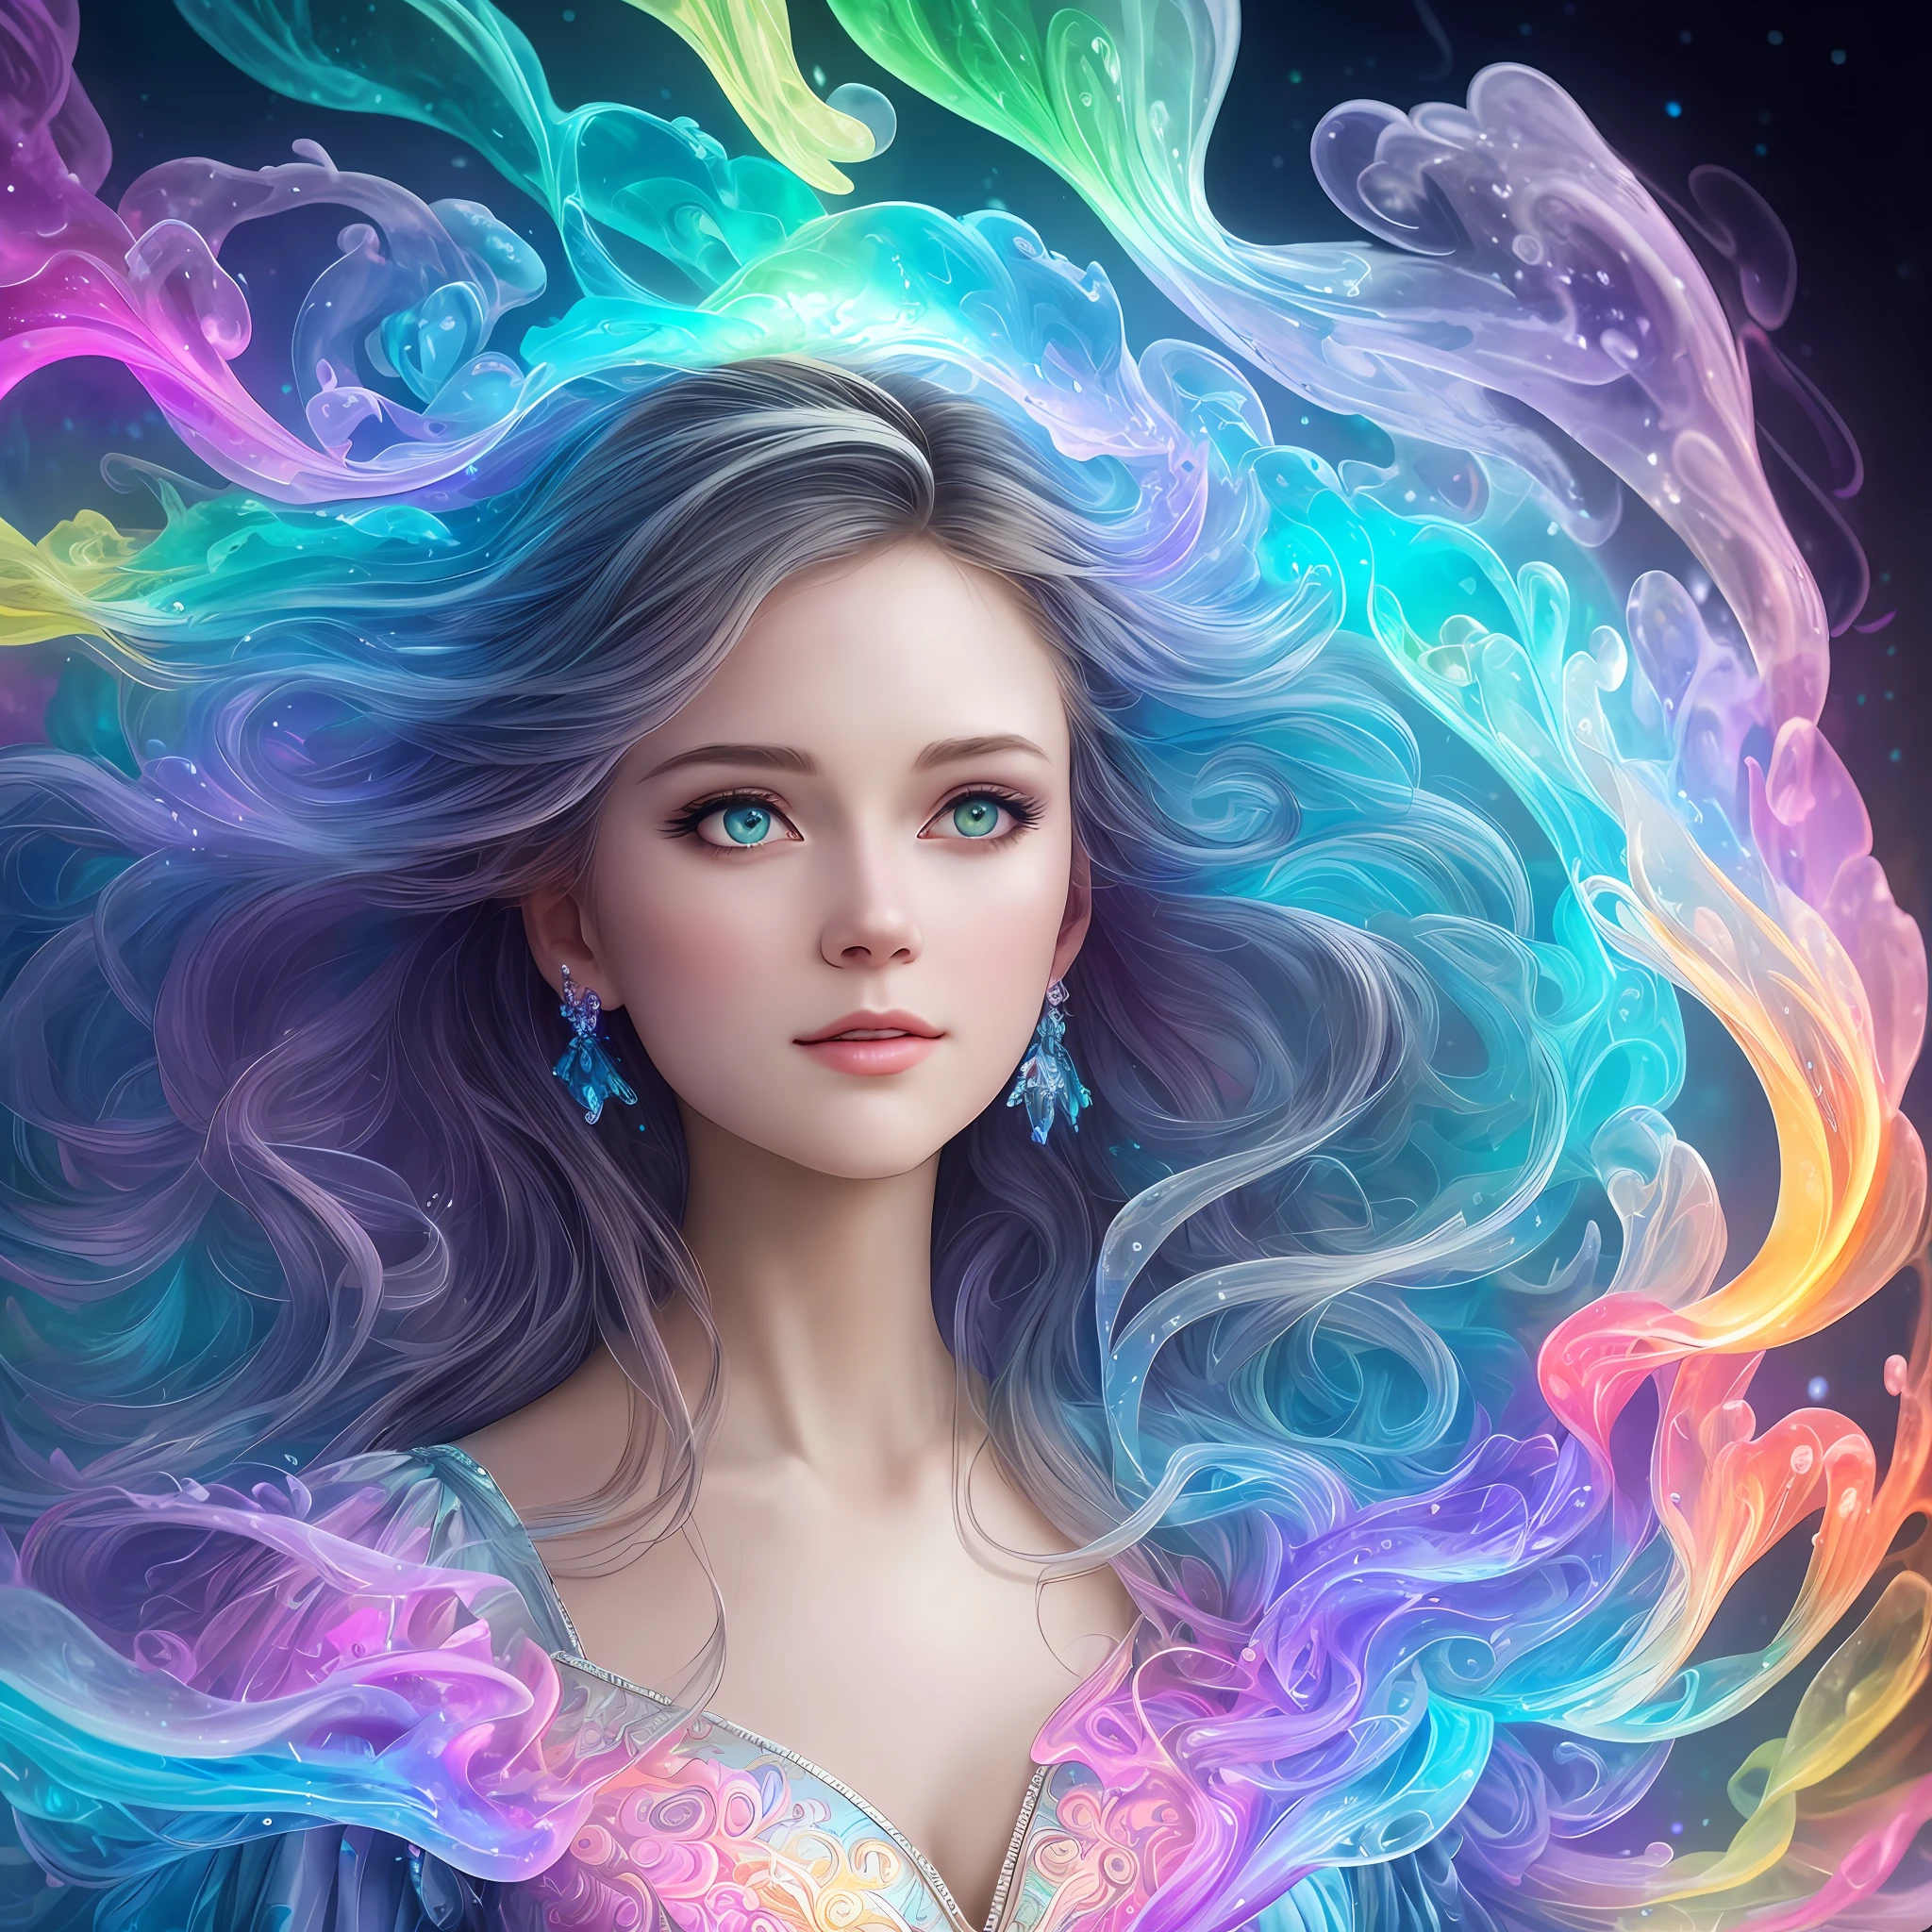 Romantic, Ultra HD, Attractive, Ethereal, Elegant, 1Girl, solo,milf, Beautiful, Flawless, Angelic, Soft Liquid Rainbow Smoke Background, Wind, Fractal Neon Antimatter Finishes, Very Detailed, Trends on Artstation, Clear Focus, Studio Photos, Intricate Details, Very Detailed, by Artgerm, Thomas Kinkade, Anna Dittmann, Gerhard Richter